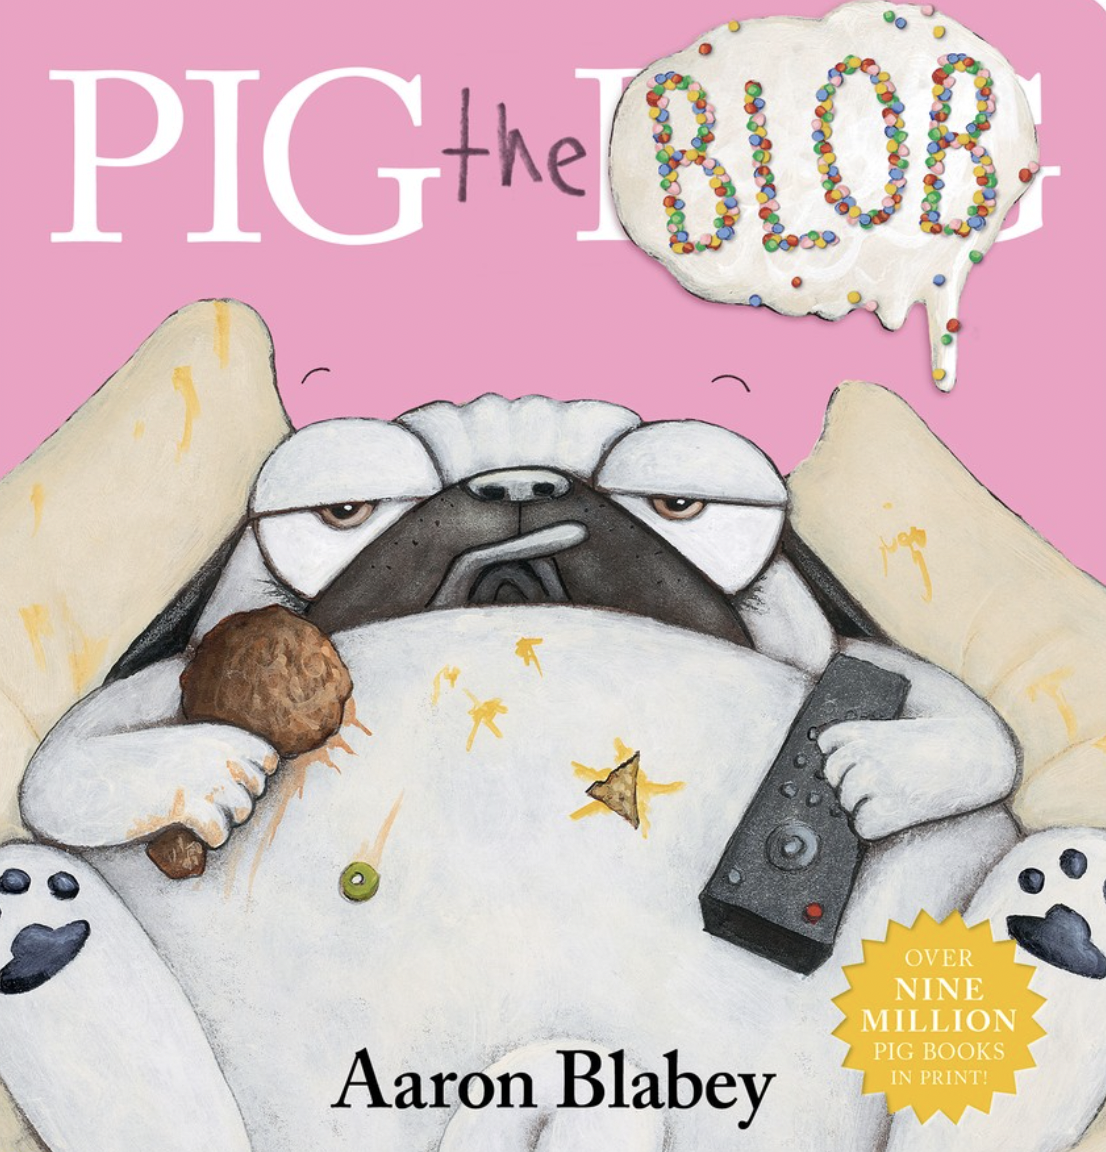 Pig the Blob by Aaron Blabey